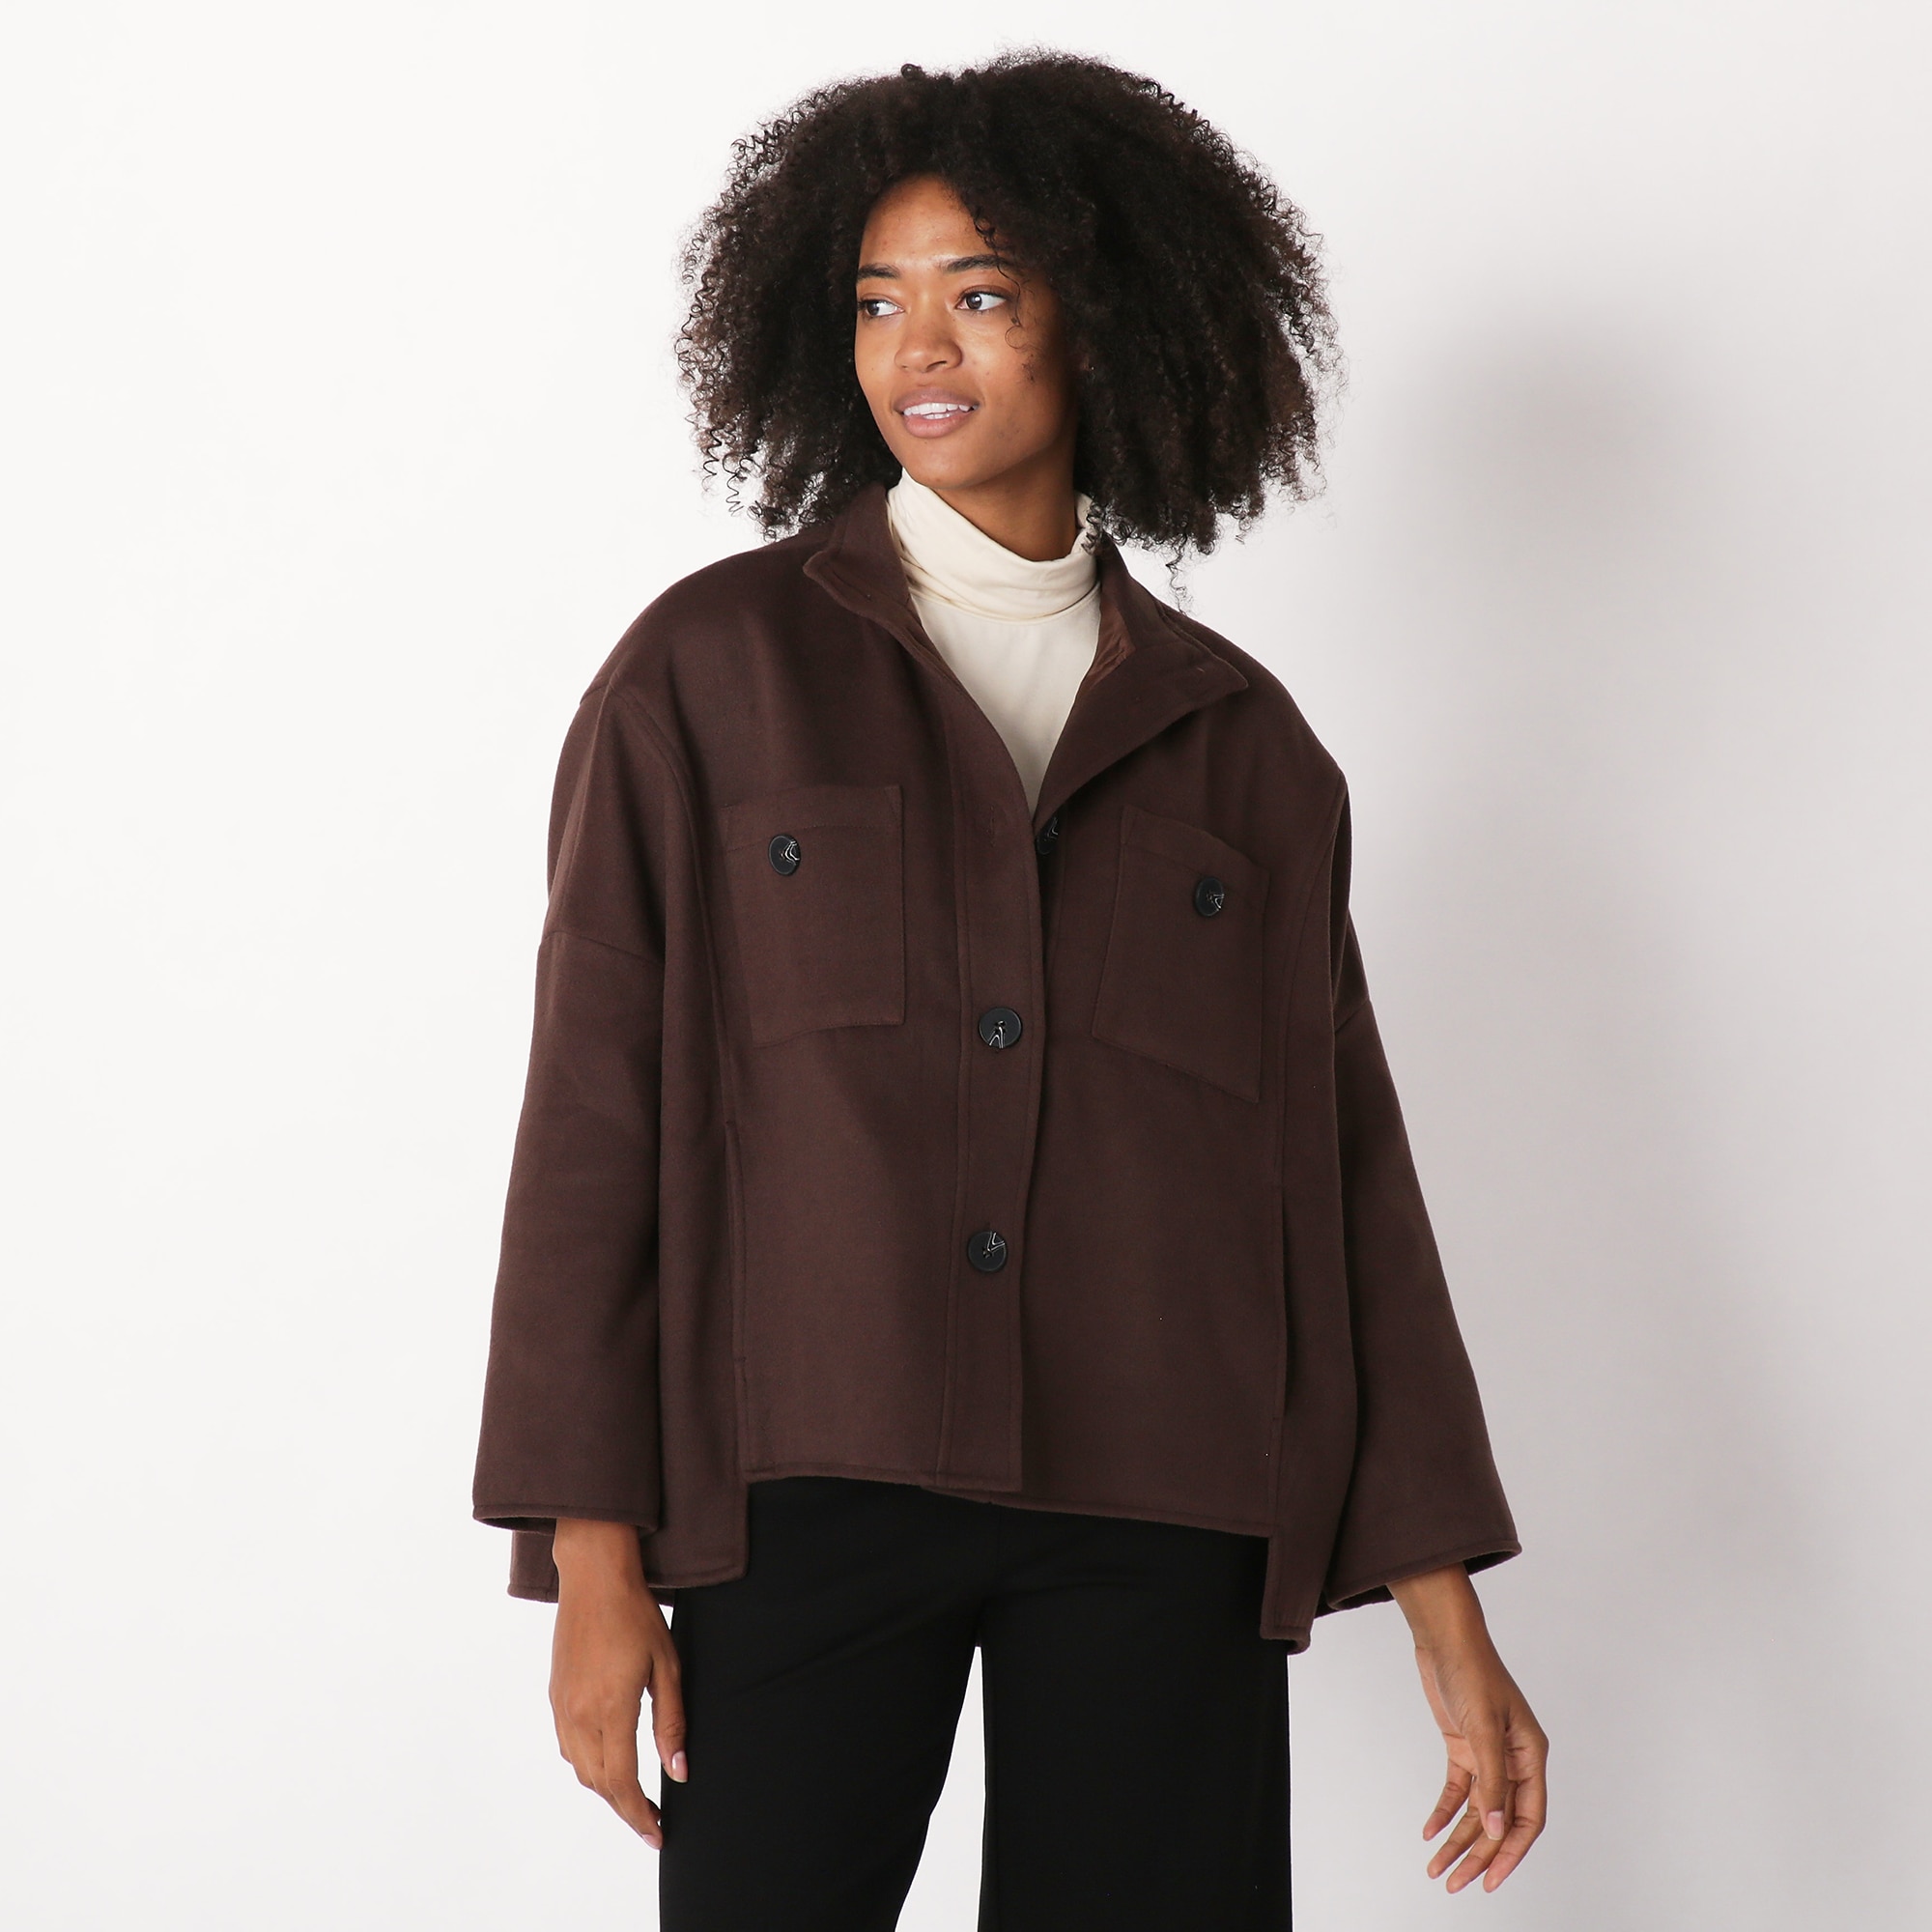 Clothing & Shoes - Jackets & Coats - Lightweight Jackets - Wynne